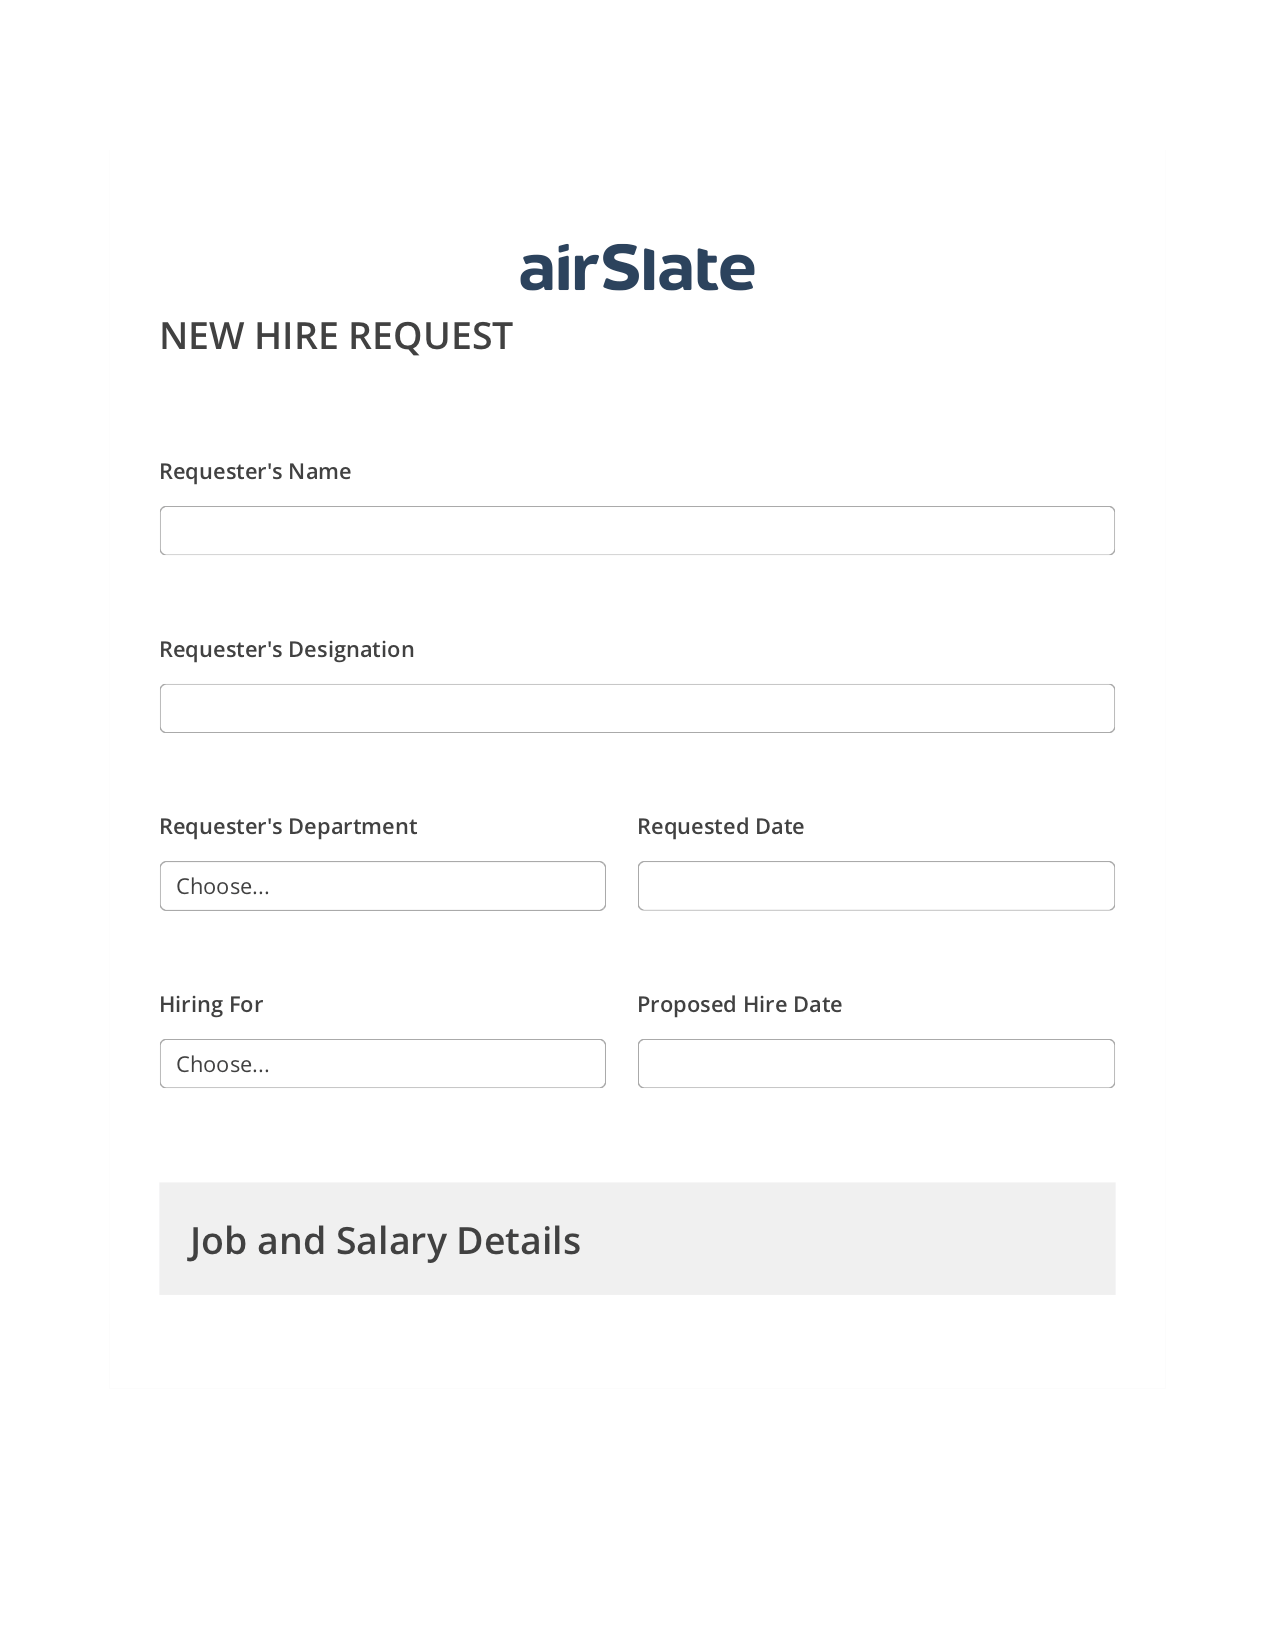 Hiring Request Workflow Pre-fill Dropdowns from Google Sheet Bot, Jira Bot, Archive to SharePoint Folder Bot